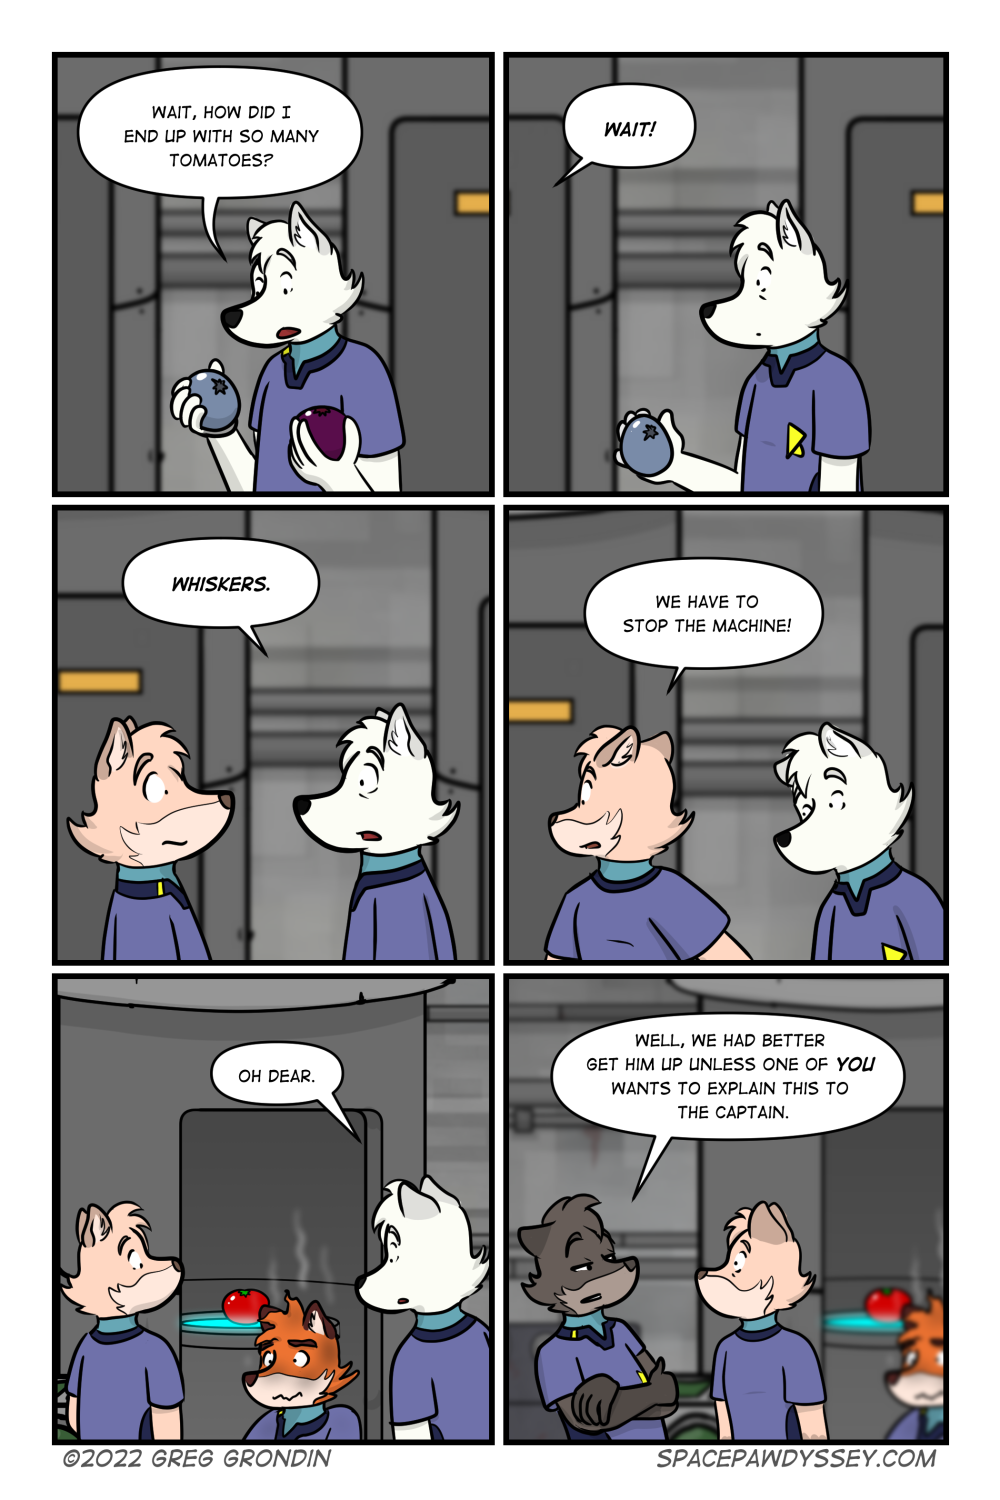 Space Pawdyssey #596